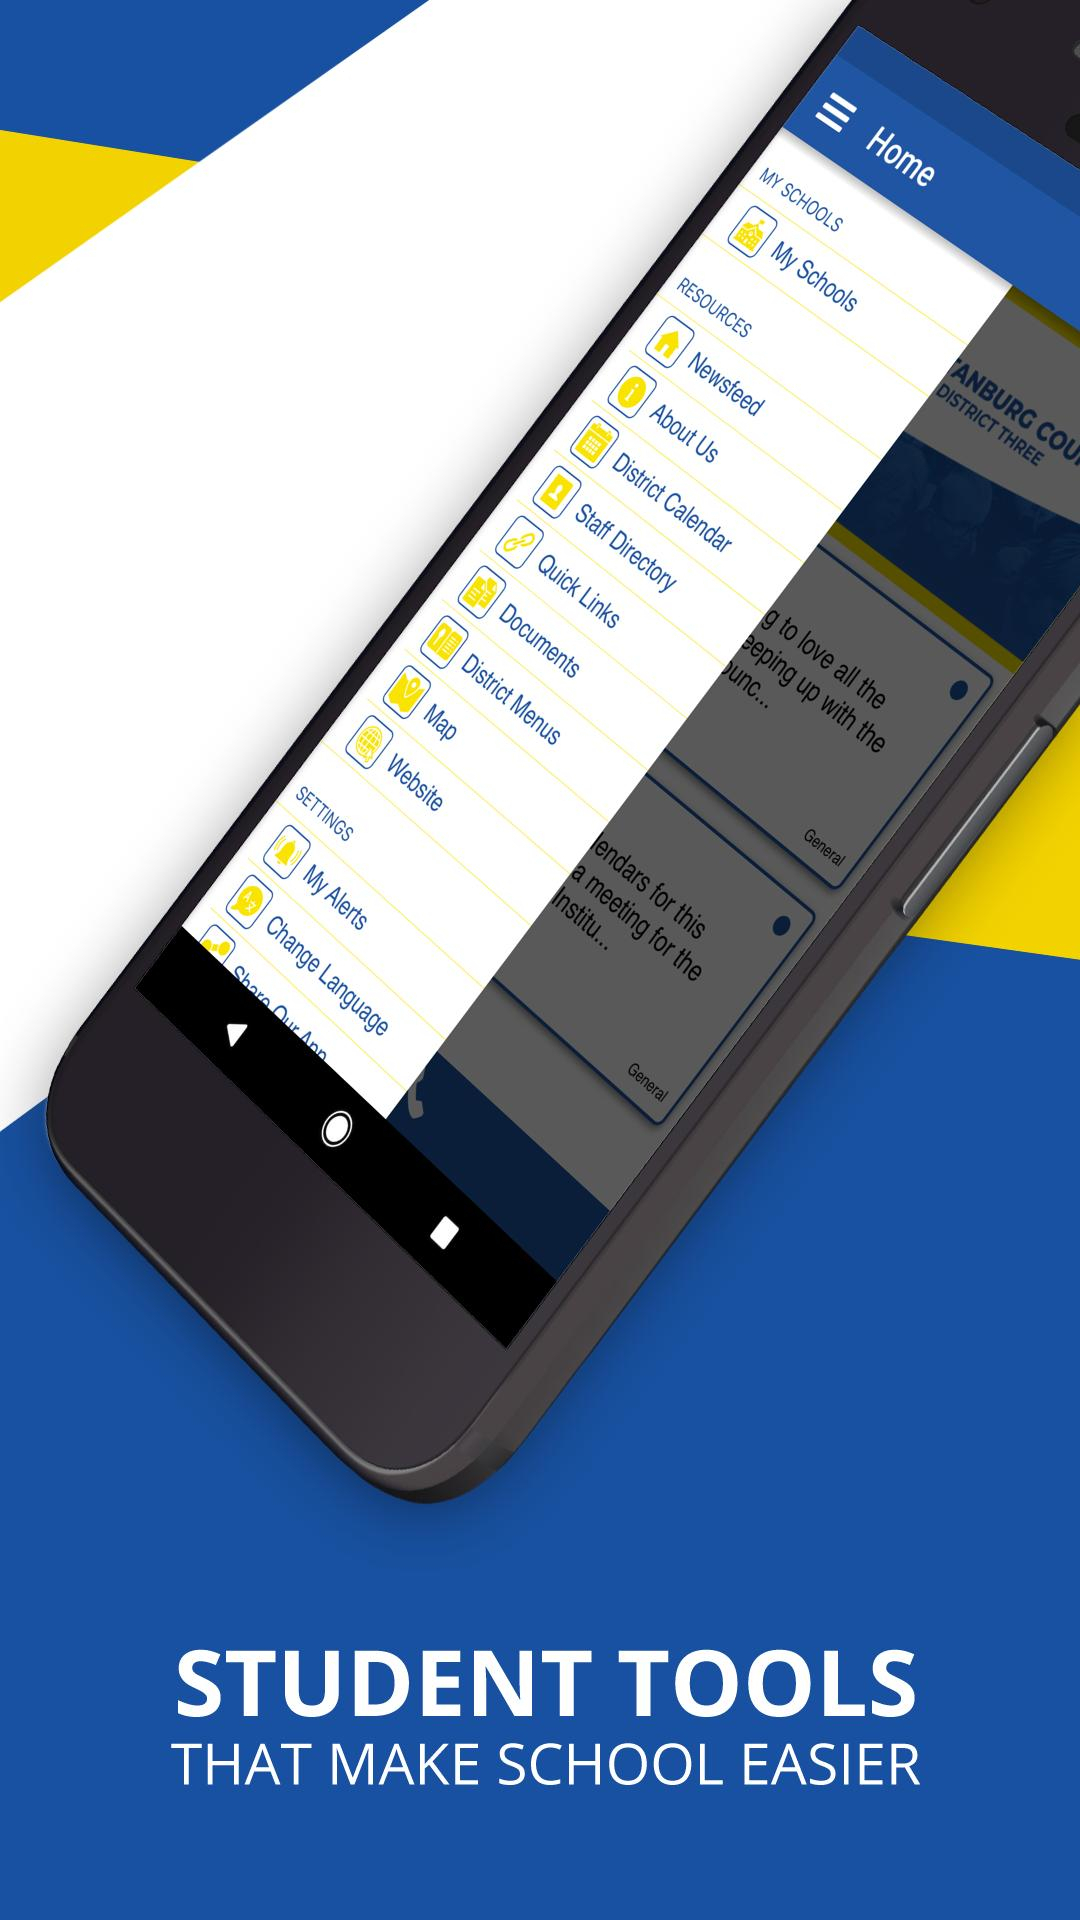 Spartanburg School District 3 For Android  Apk Download pertaining to Spartanburg School District 3 Calendar